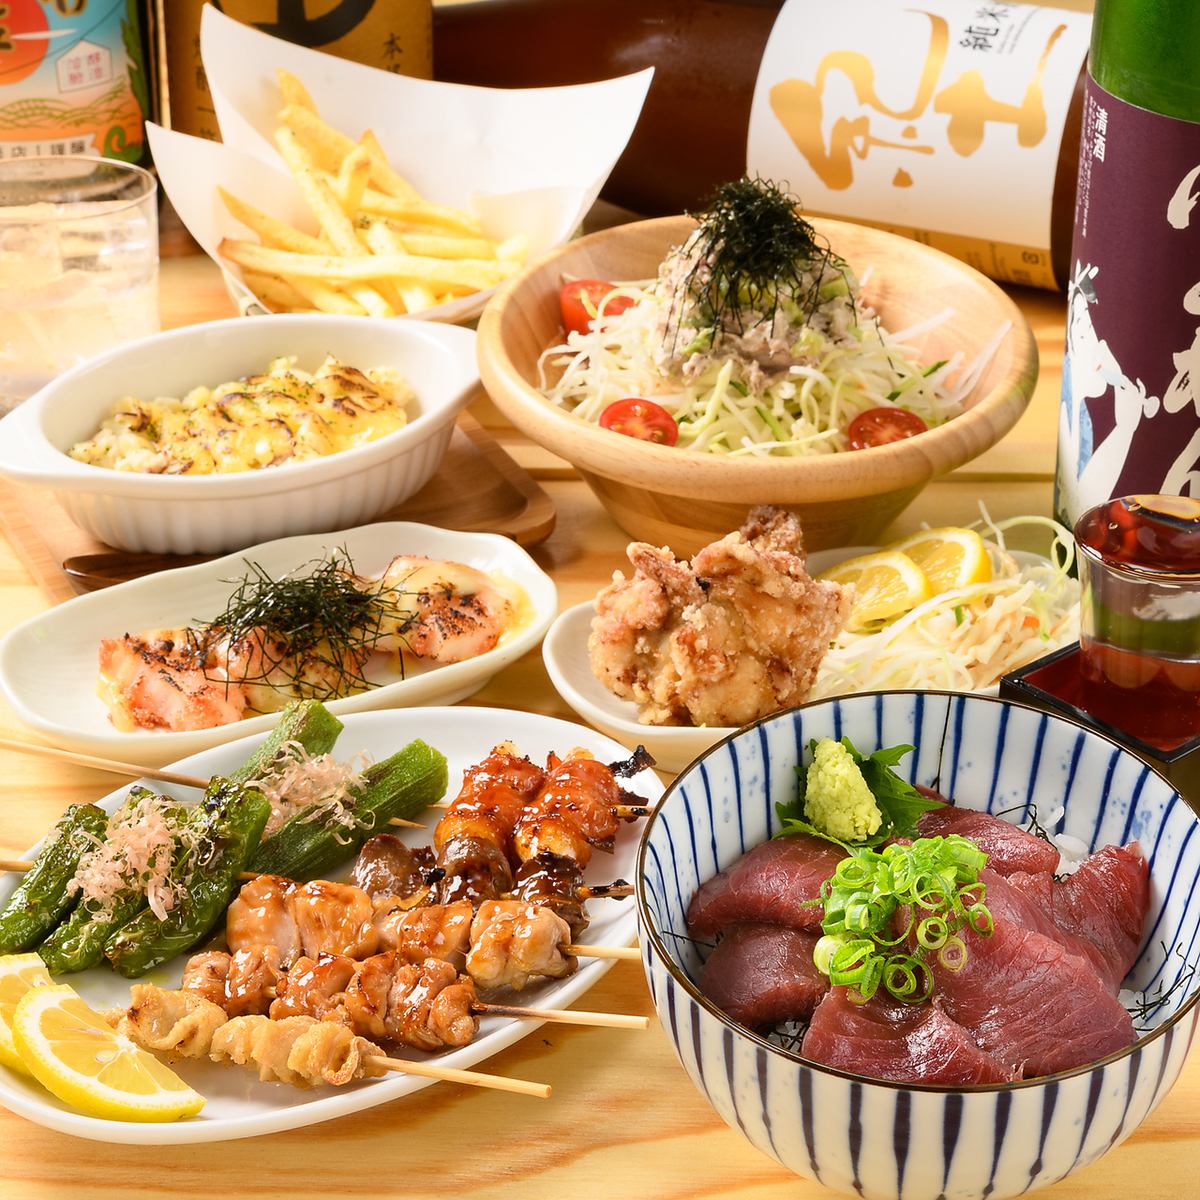 You can enjoy delicious food and sake made with fresh ingredients!